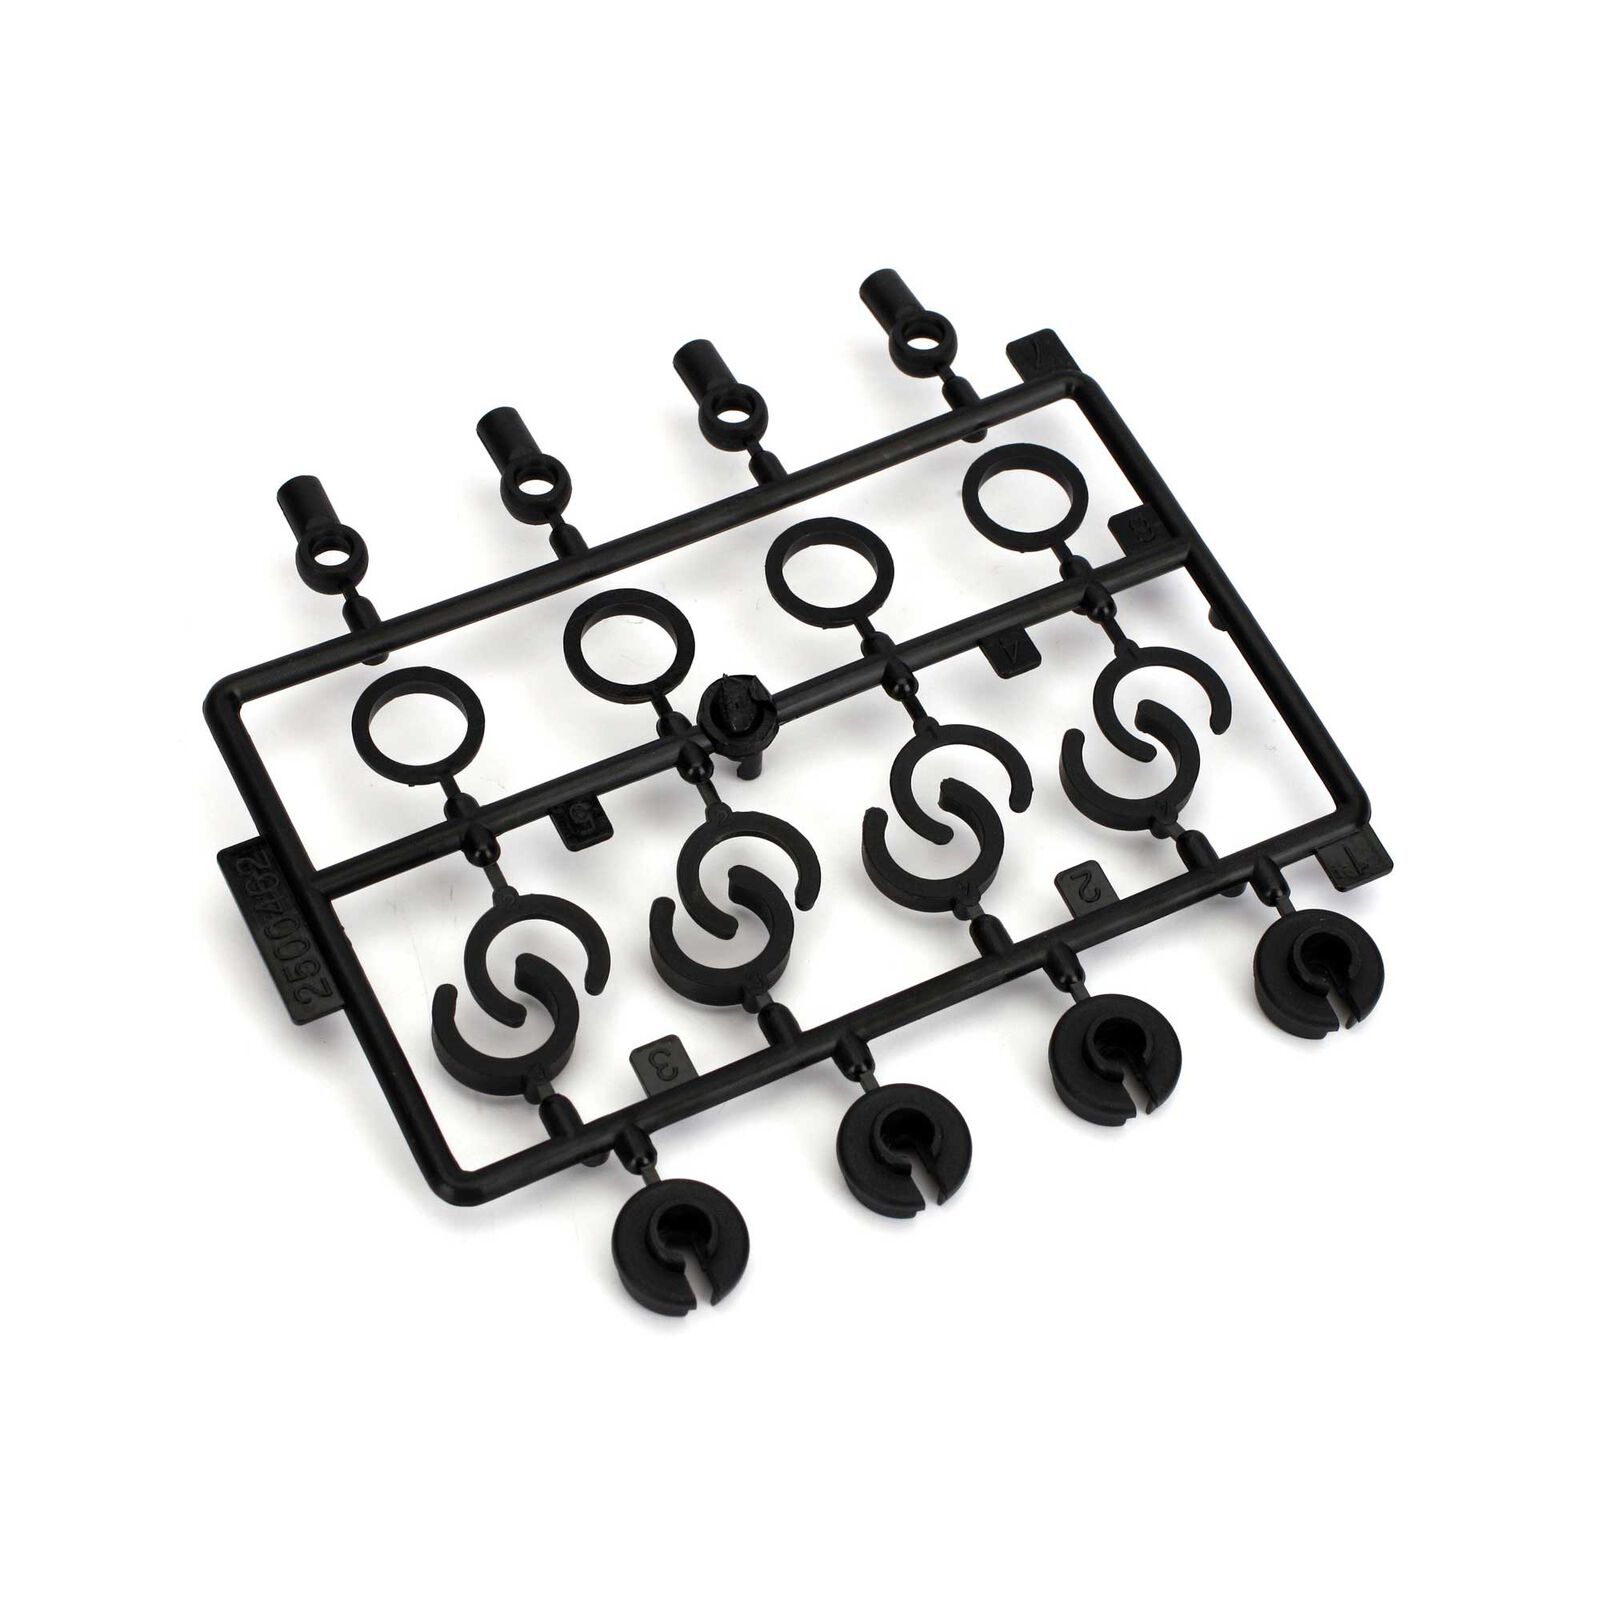 Shock End, Spring Cup, Spring Clip Set: All ECX 1/10 2WD